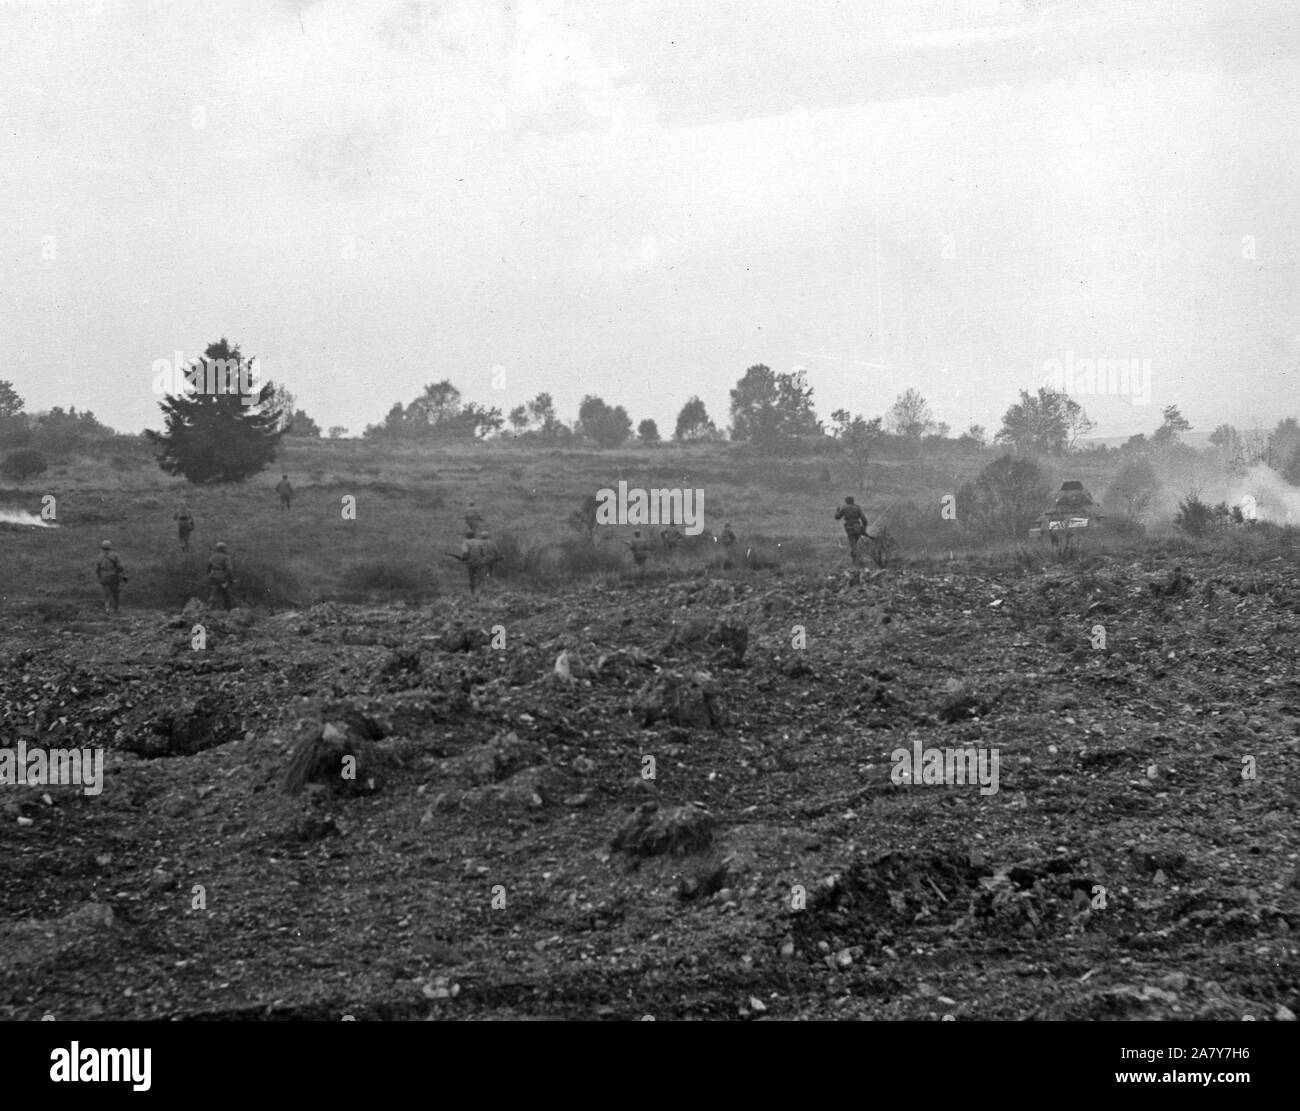 American Infantrymen race across an open field to reach a German pillbox, on the of the German Siegfried line defenses, Eisenboen, Germany, 10 9 44 (28th Infantry Division) Stock Photo